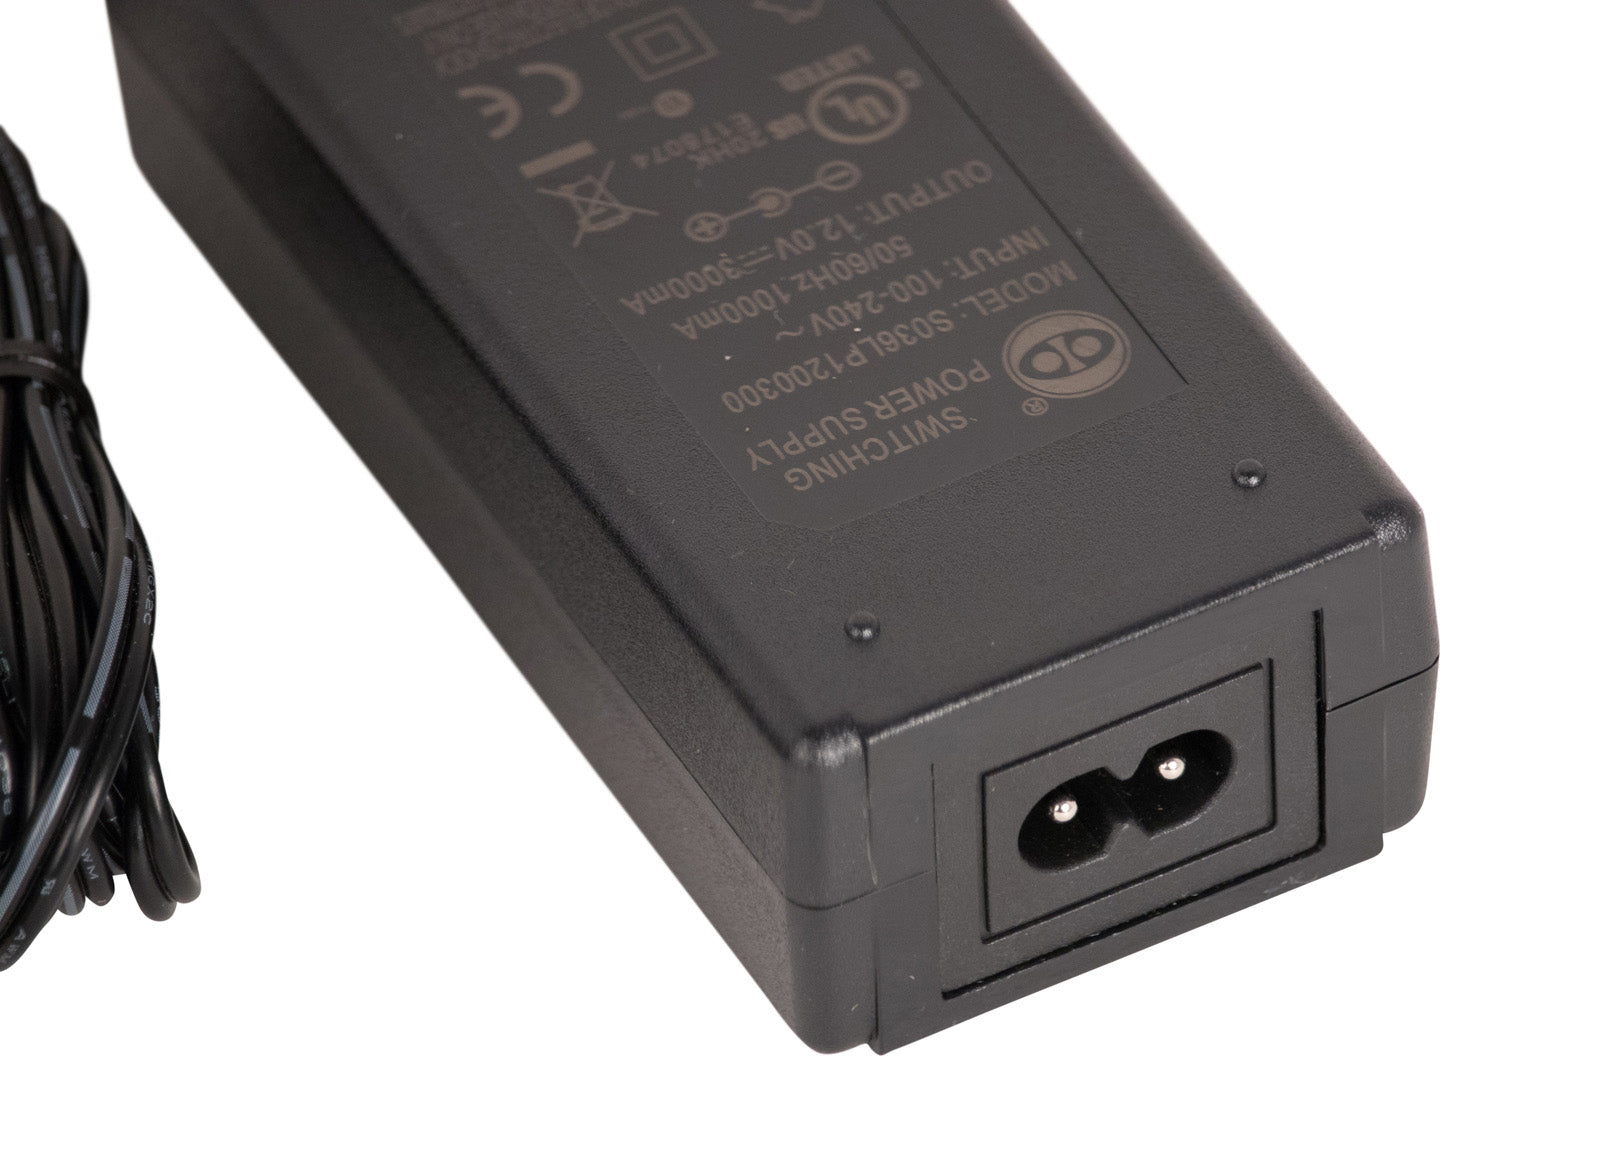 Omilik AC Adapter compatible with Delphi XM Roady 2 SA10085-11P1 LC 0705- 0079 Receiver Power Supply 